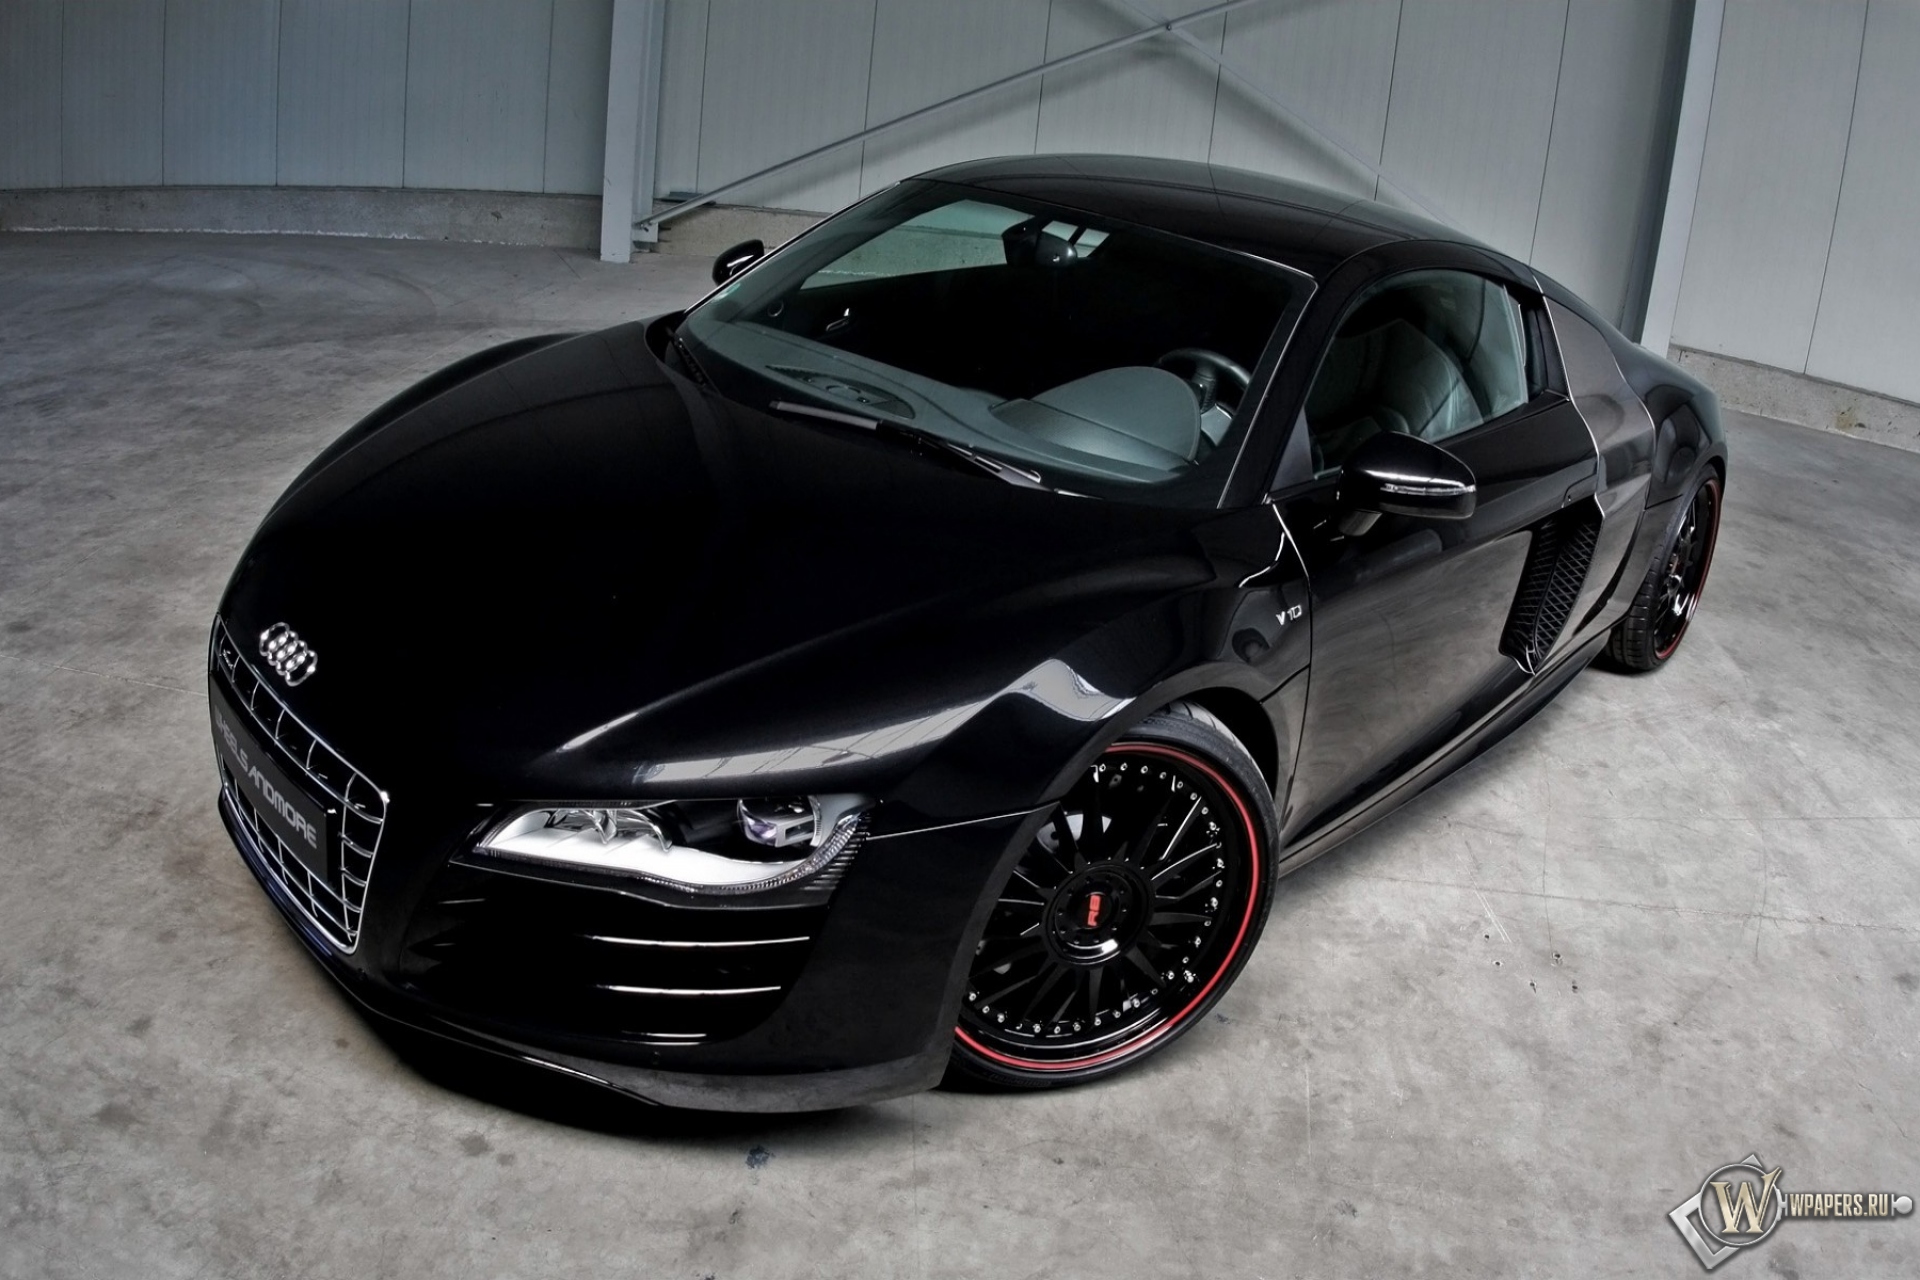 2011 Wheelsandmore Audi R8 V10 .6 - Front Angle Top 1920x1280